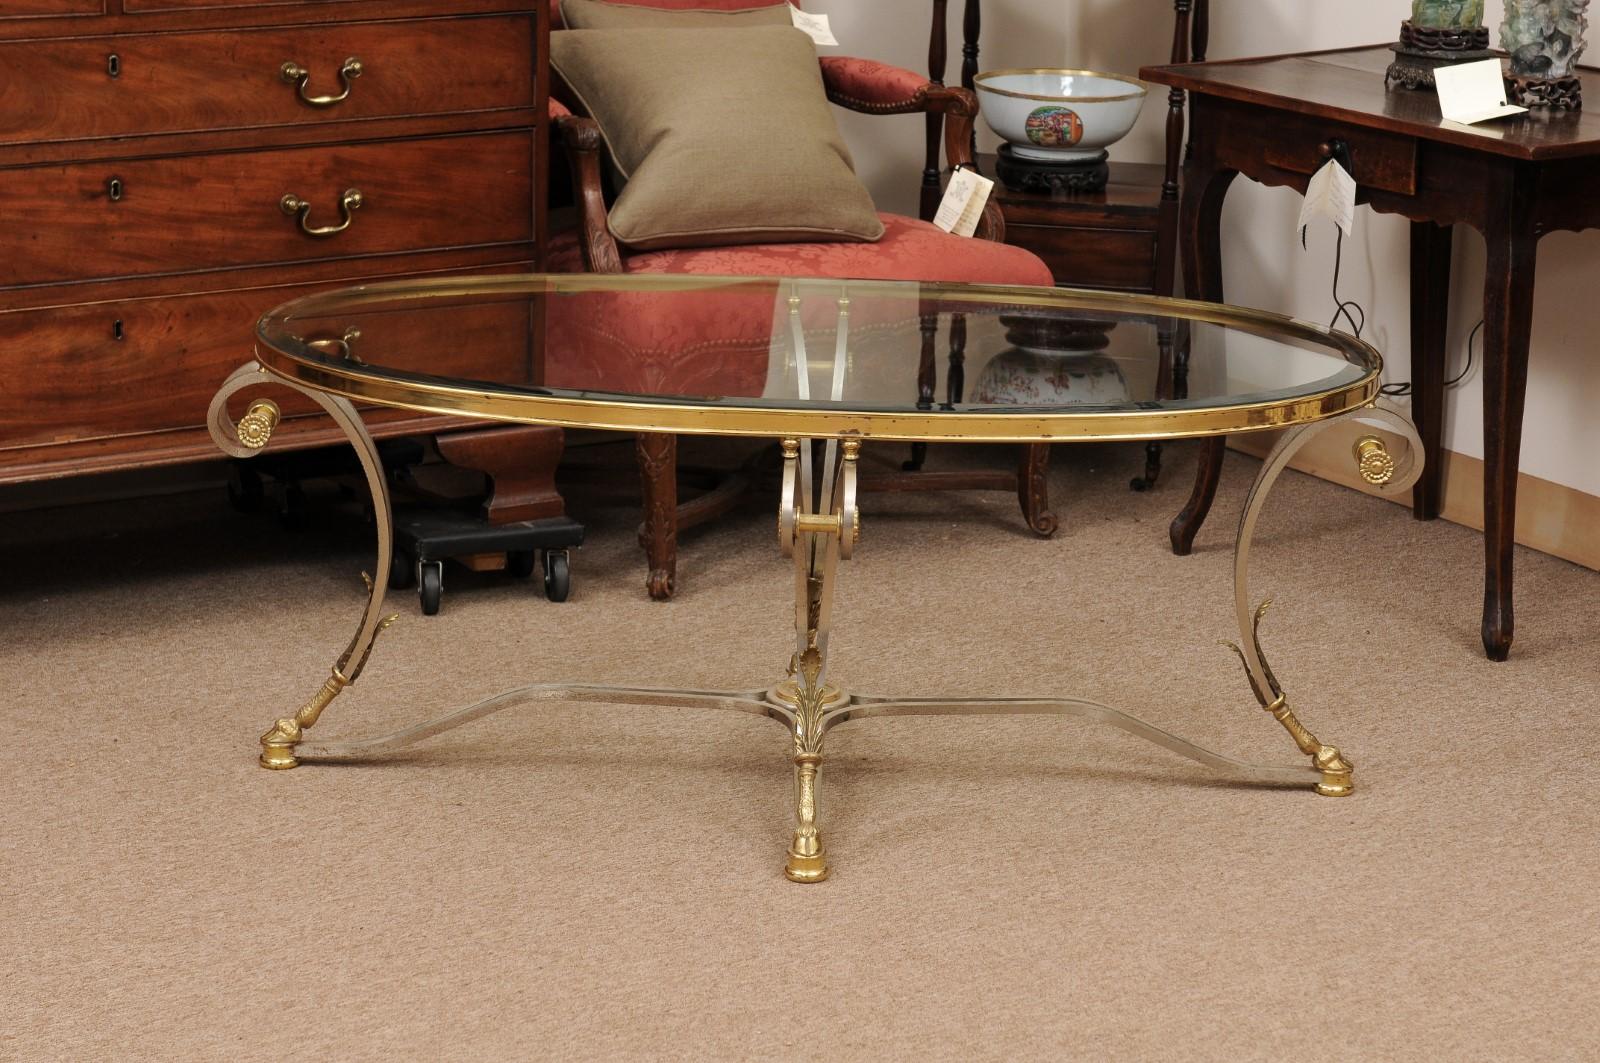 Oval French Steel & Brass Coffee Table with Glass Top, Hoof Feet & Acorn Detail 3